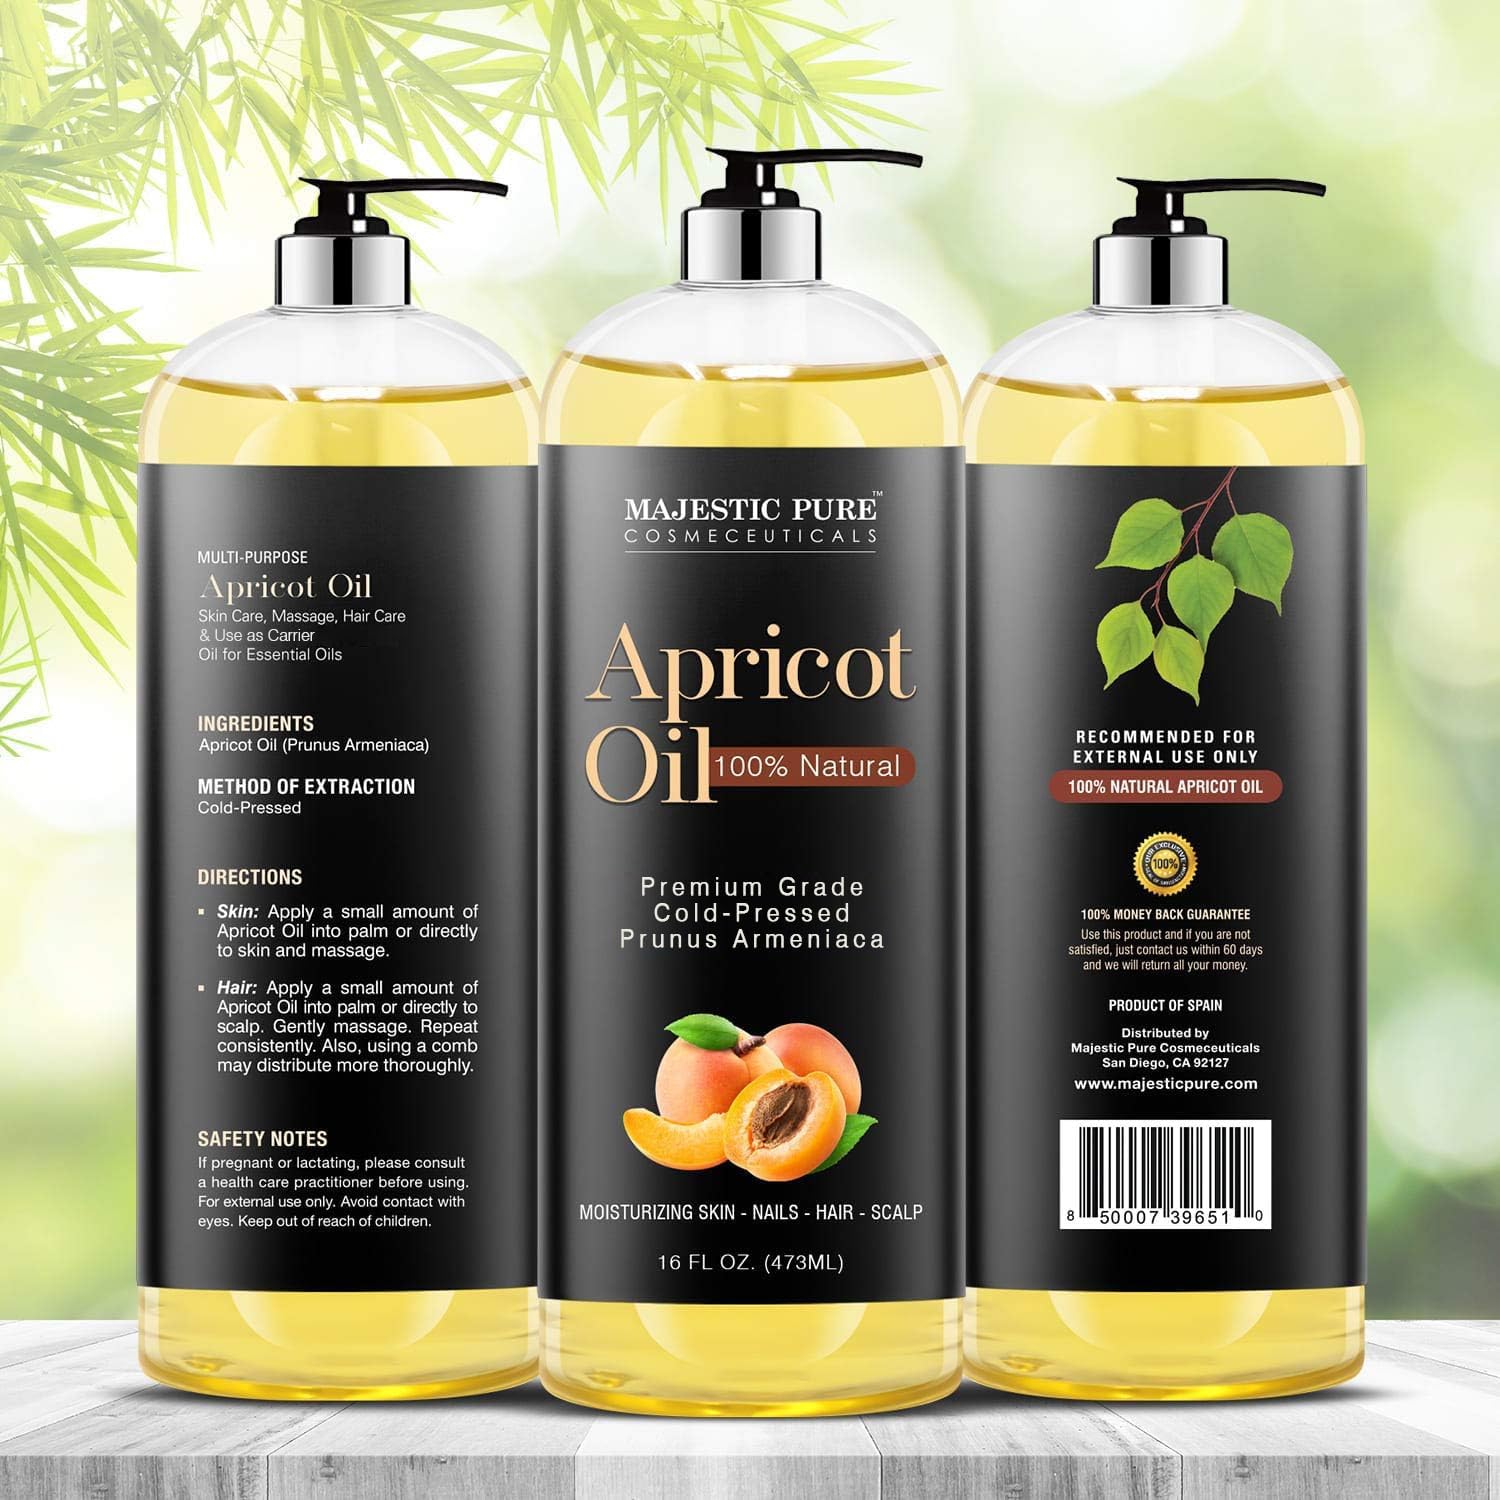 MAJESTIC PURE Apricot Oil, 100% Pure and Natural, Cold-Pressed, Apricot Kernel Oil, Moisturizing, for Skin Care, Massage, Hair Care, and to Dilute Essential Oils, 16 fl oz : Beauty & Personal Care